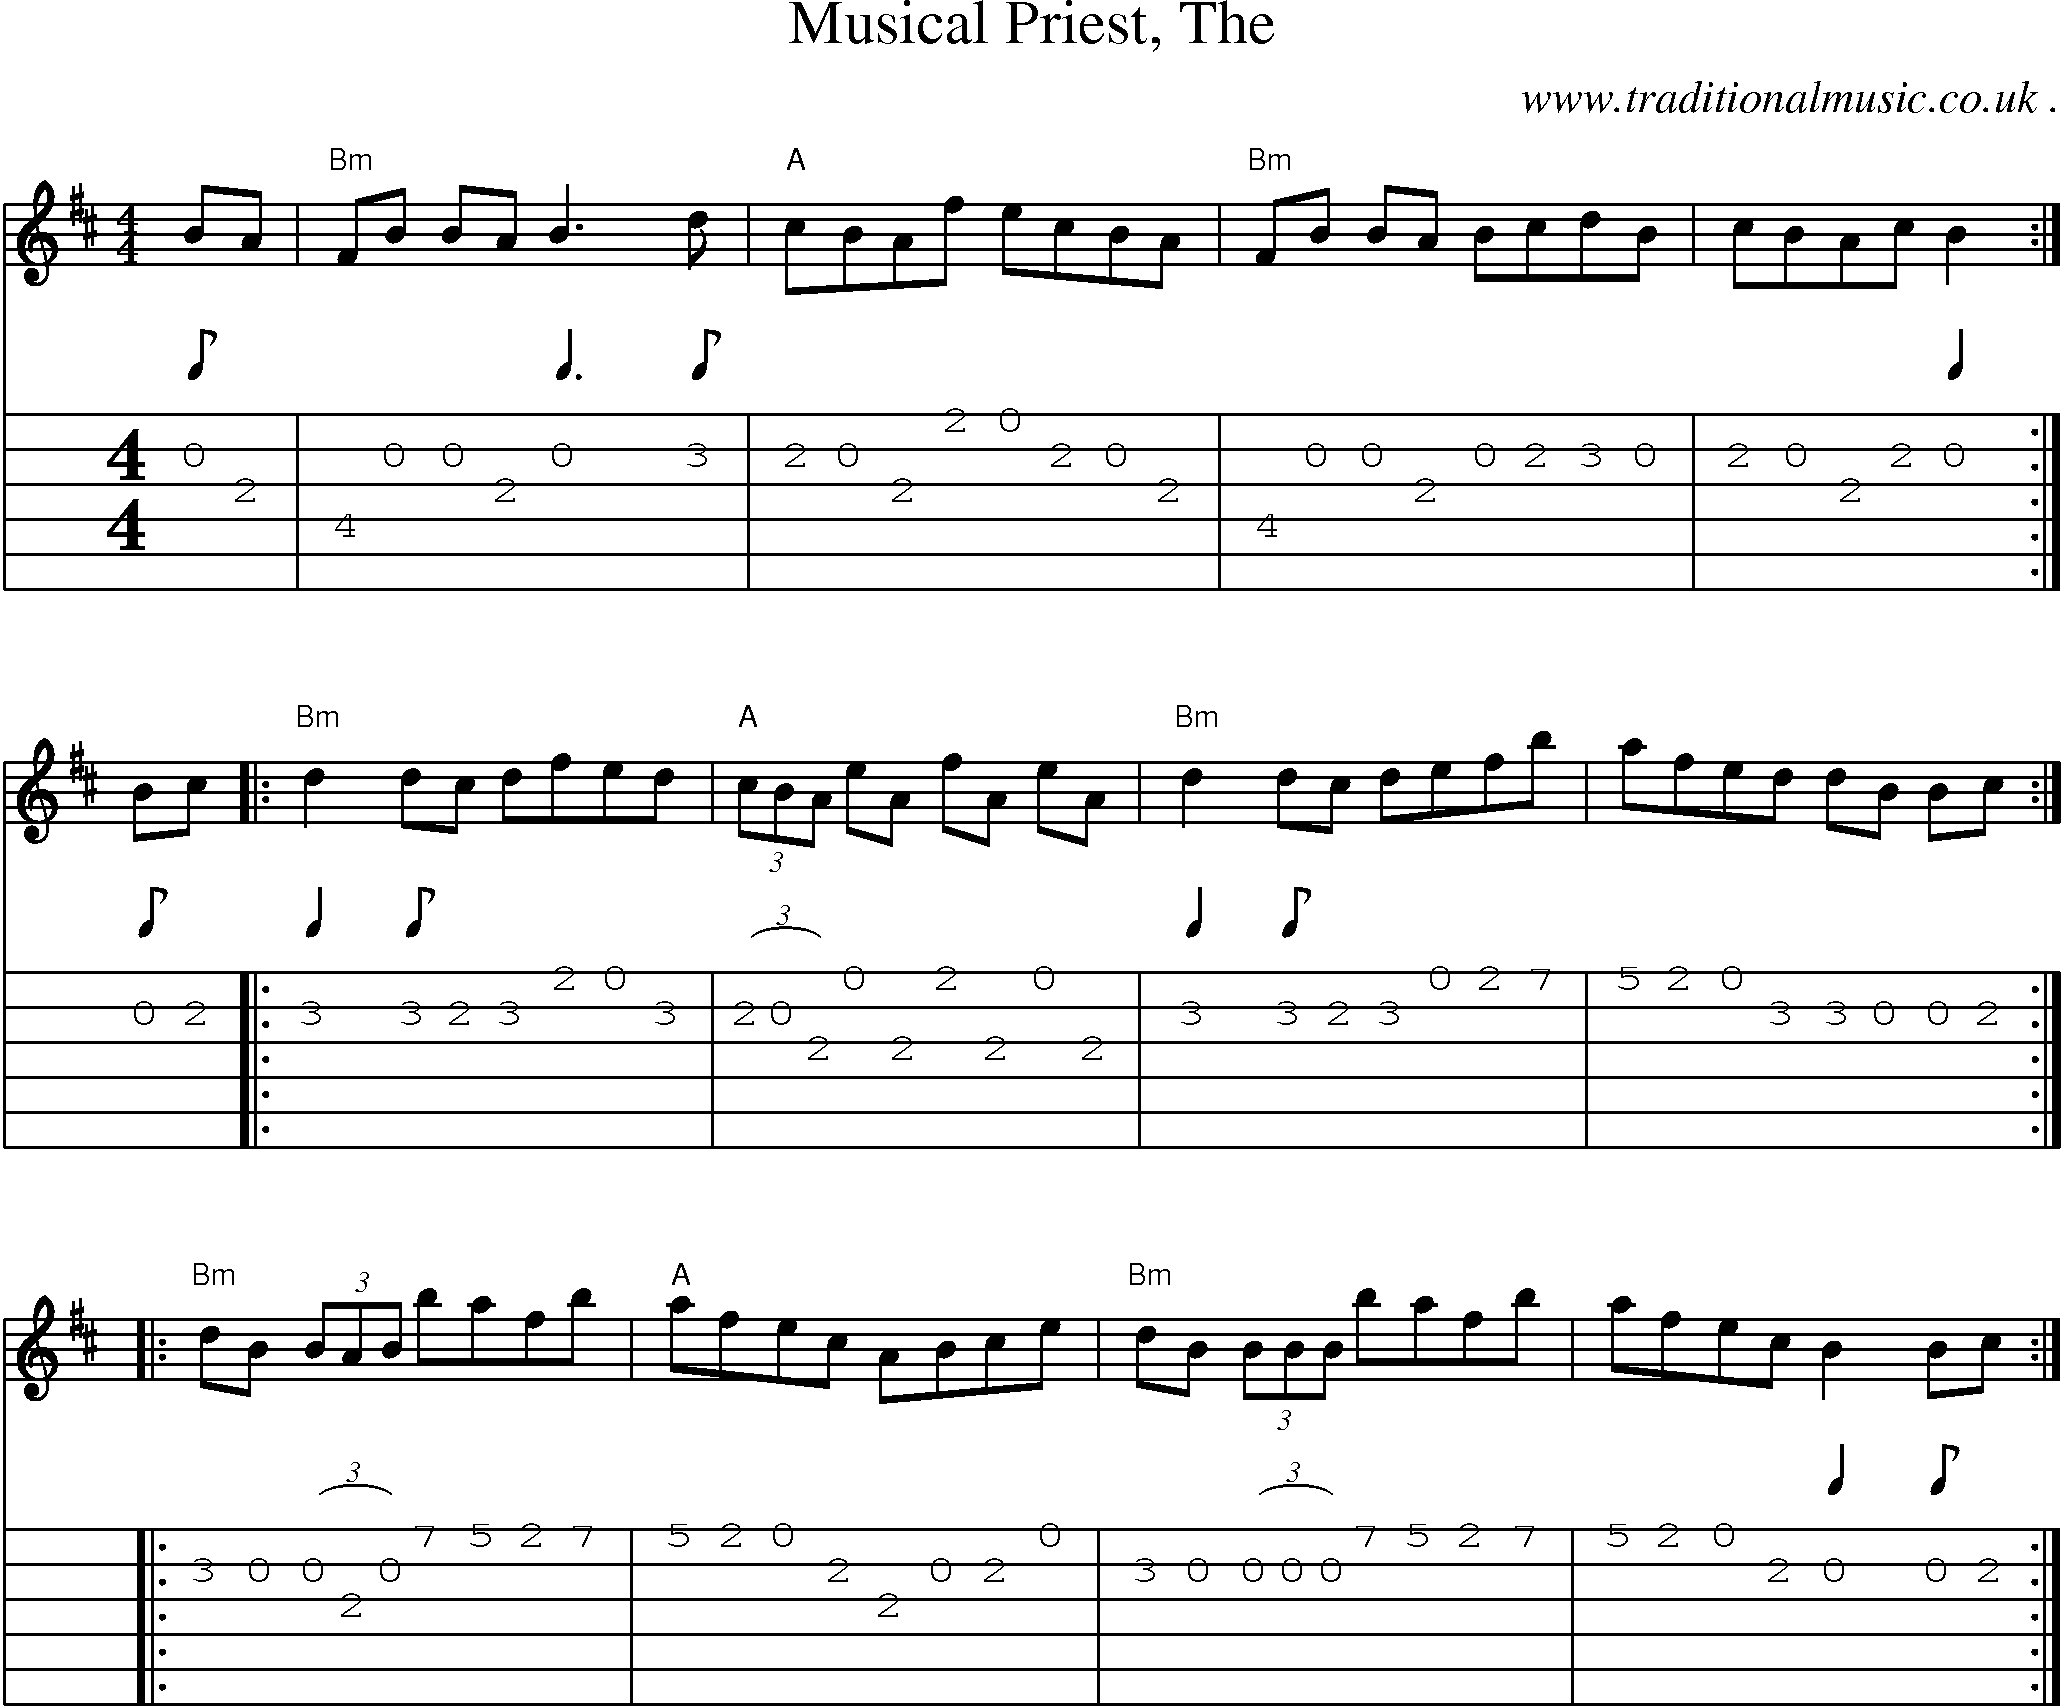 Music Score and Guitar Tabs for Musical Priest The